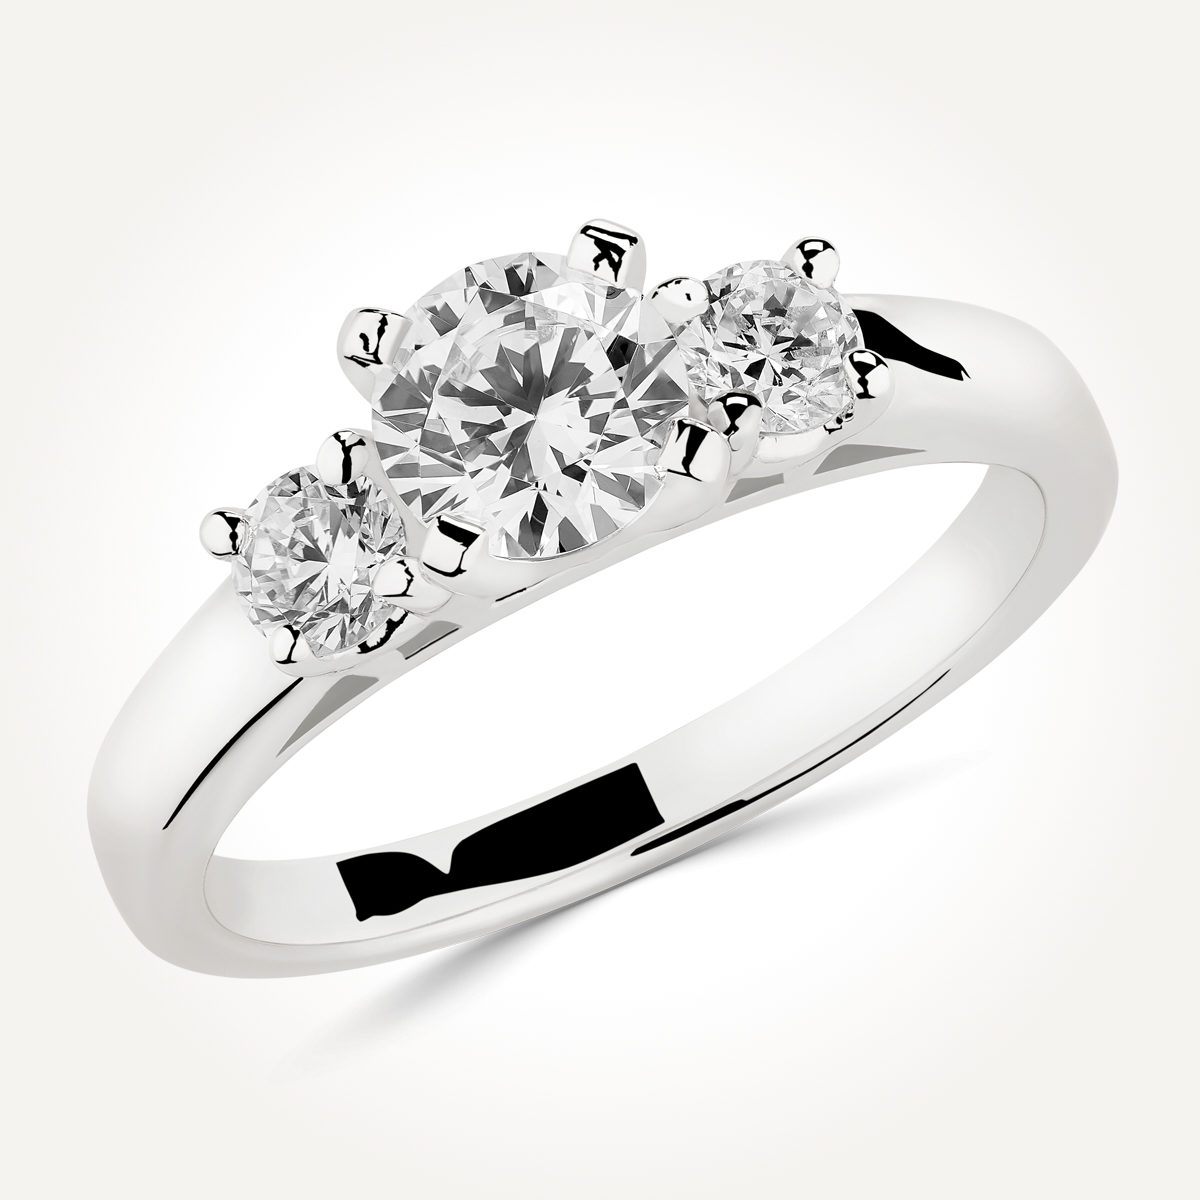 Multi Stone Engagement Ring - 7523 A